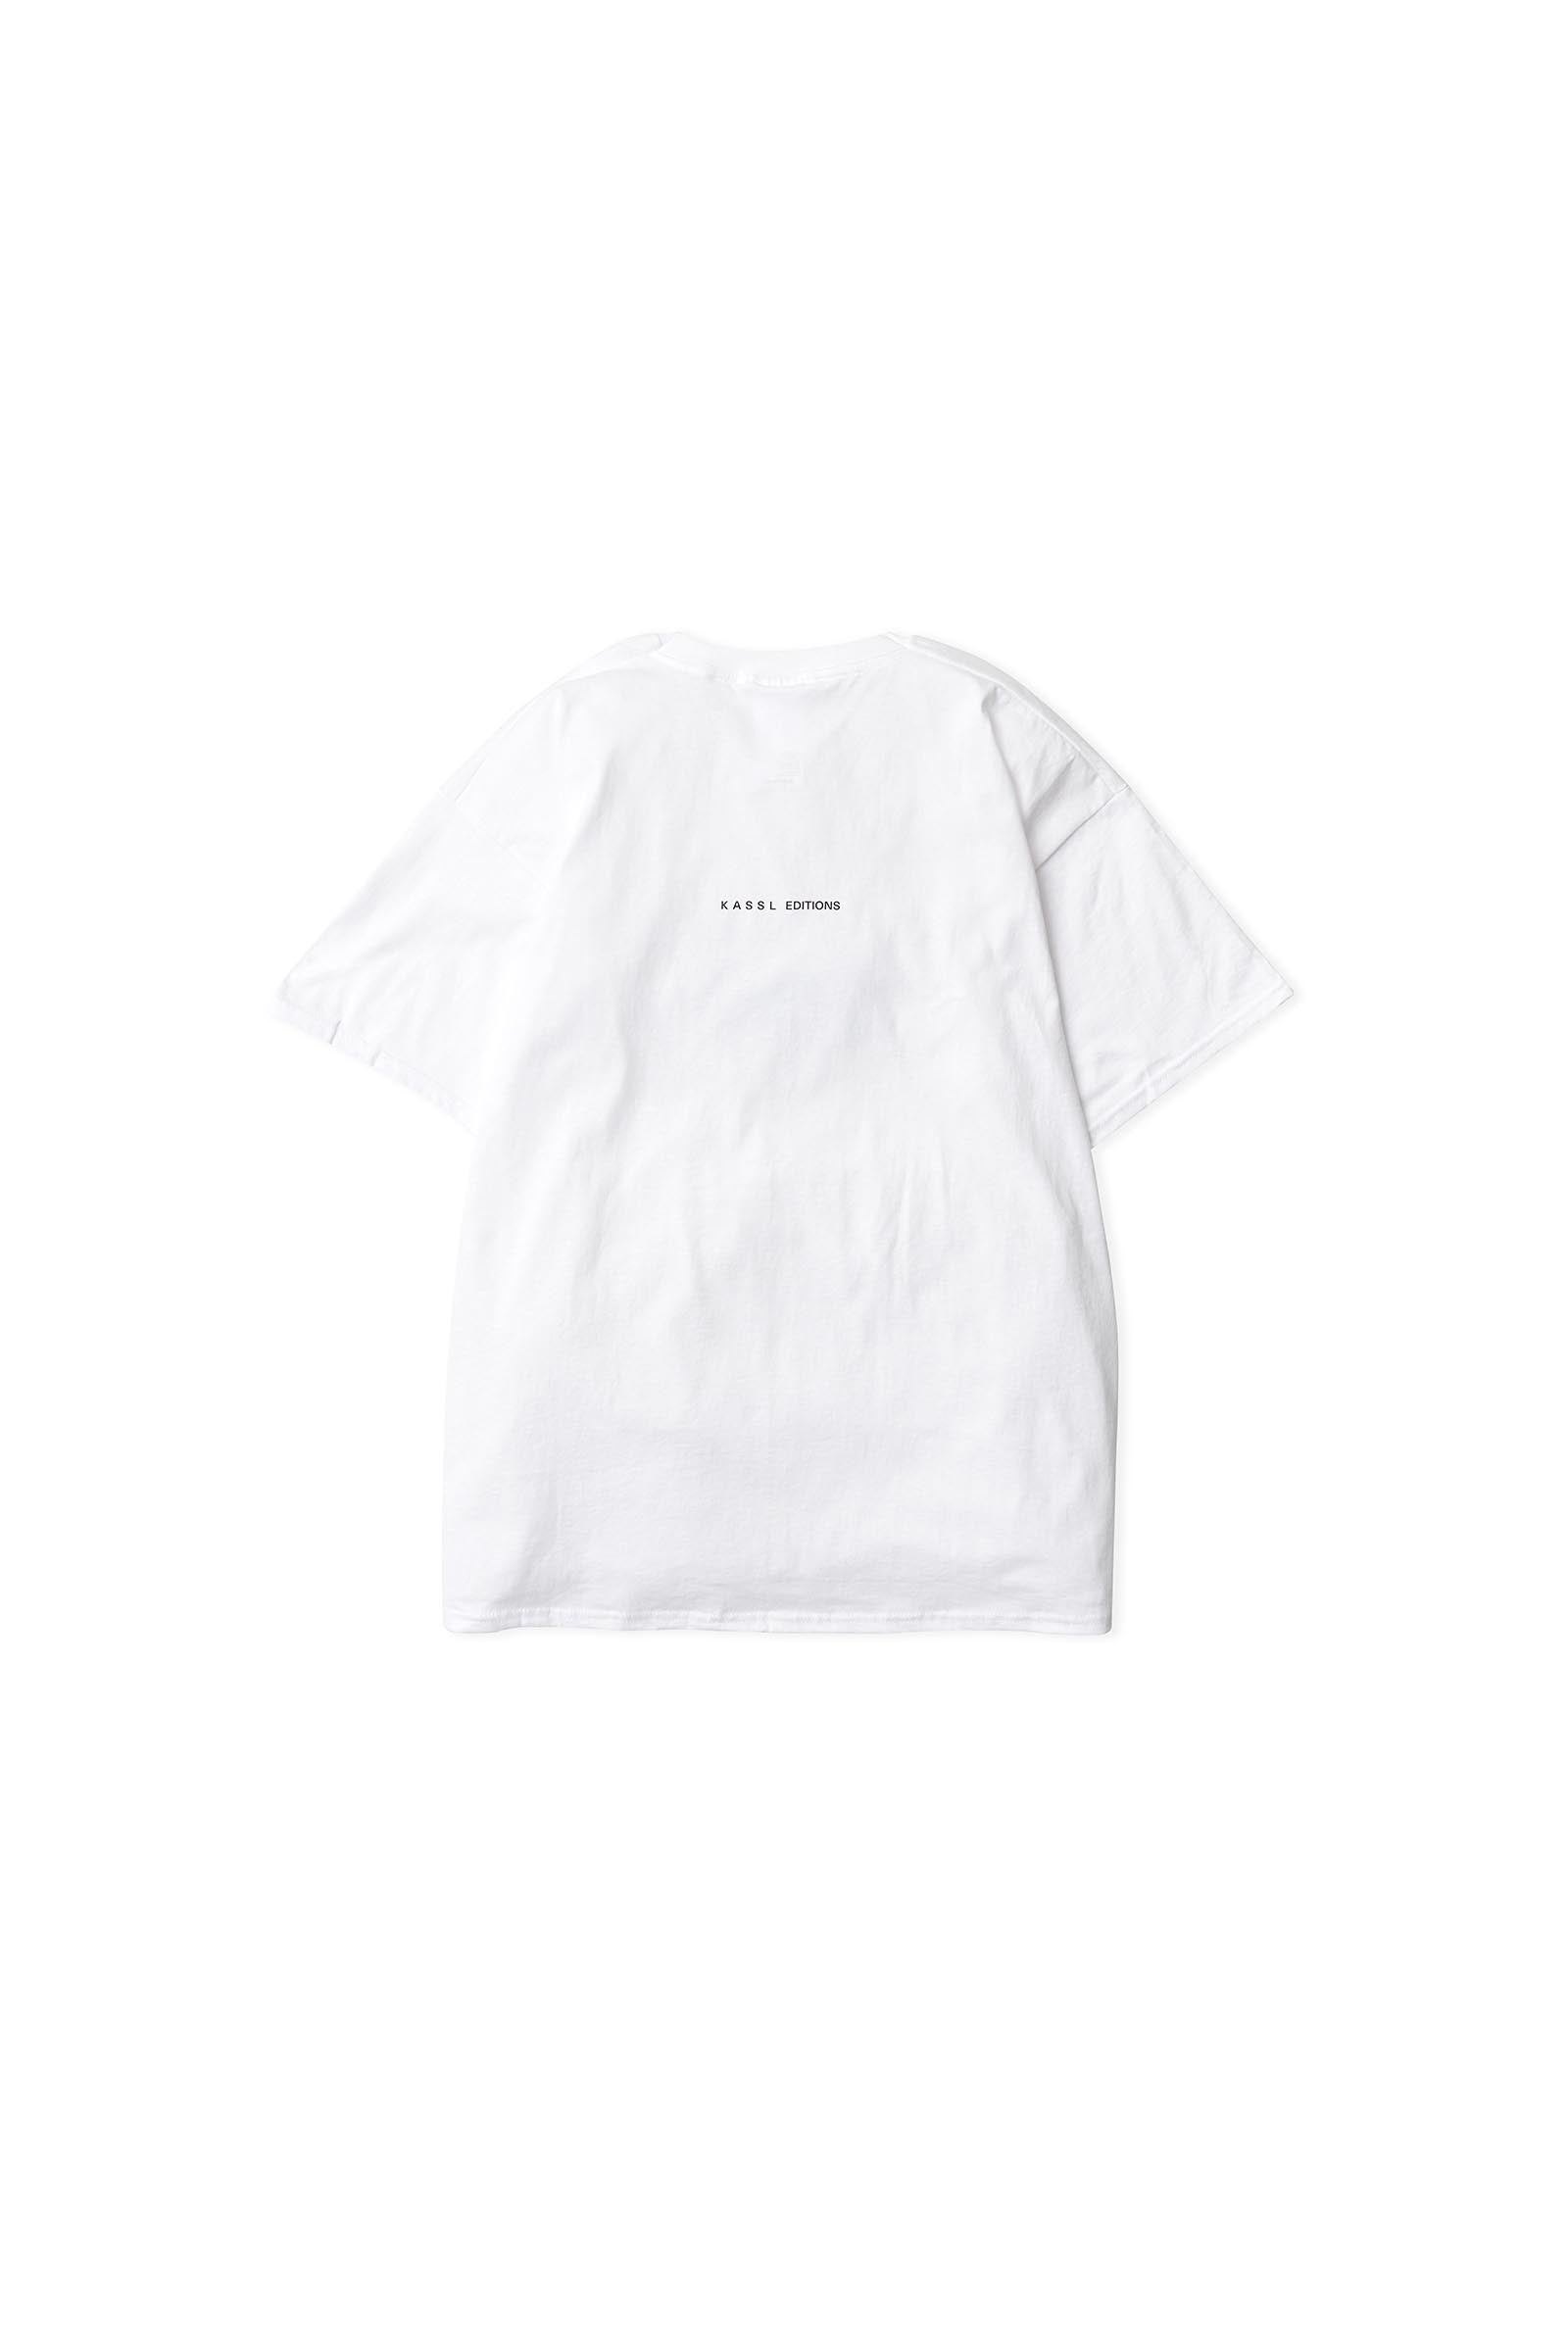 KASSL EDITIONS / Tee cotton white bomber